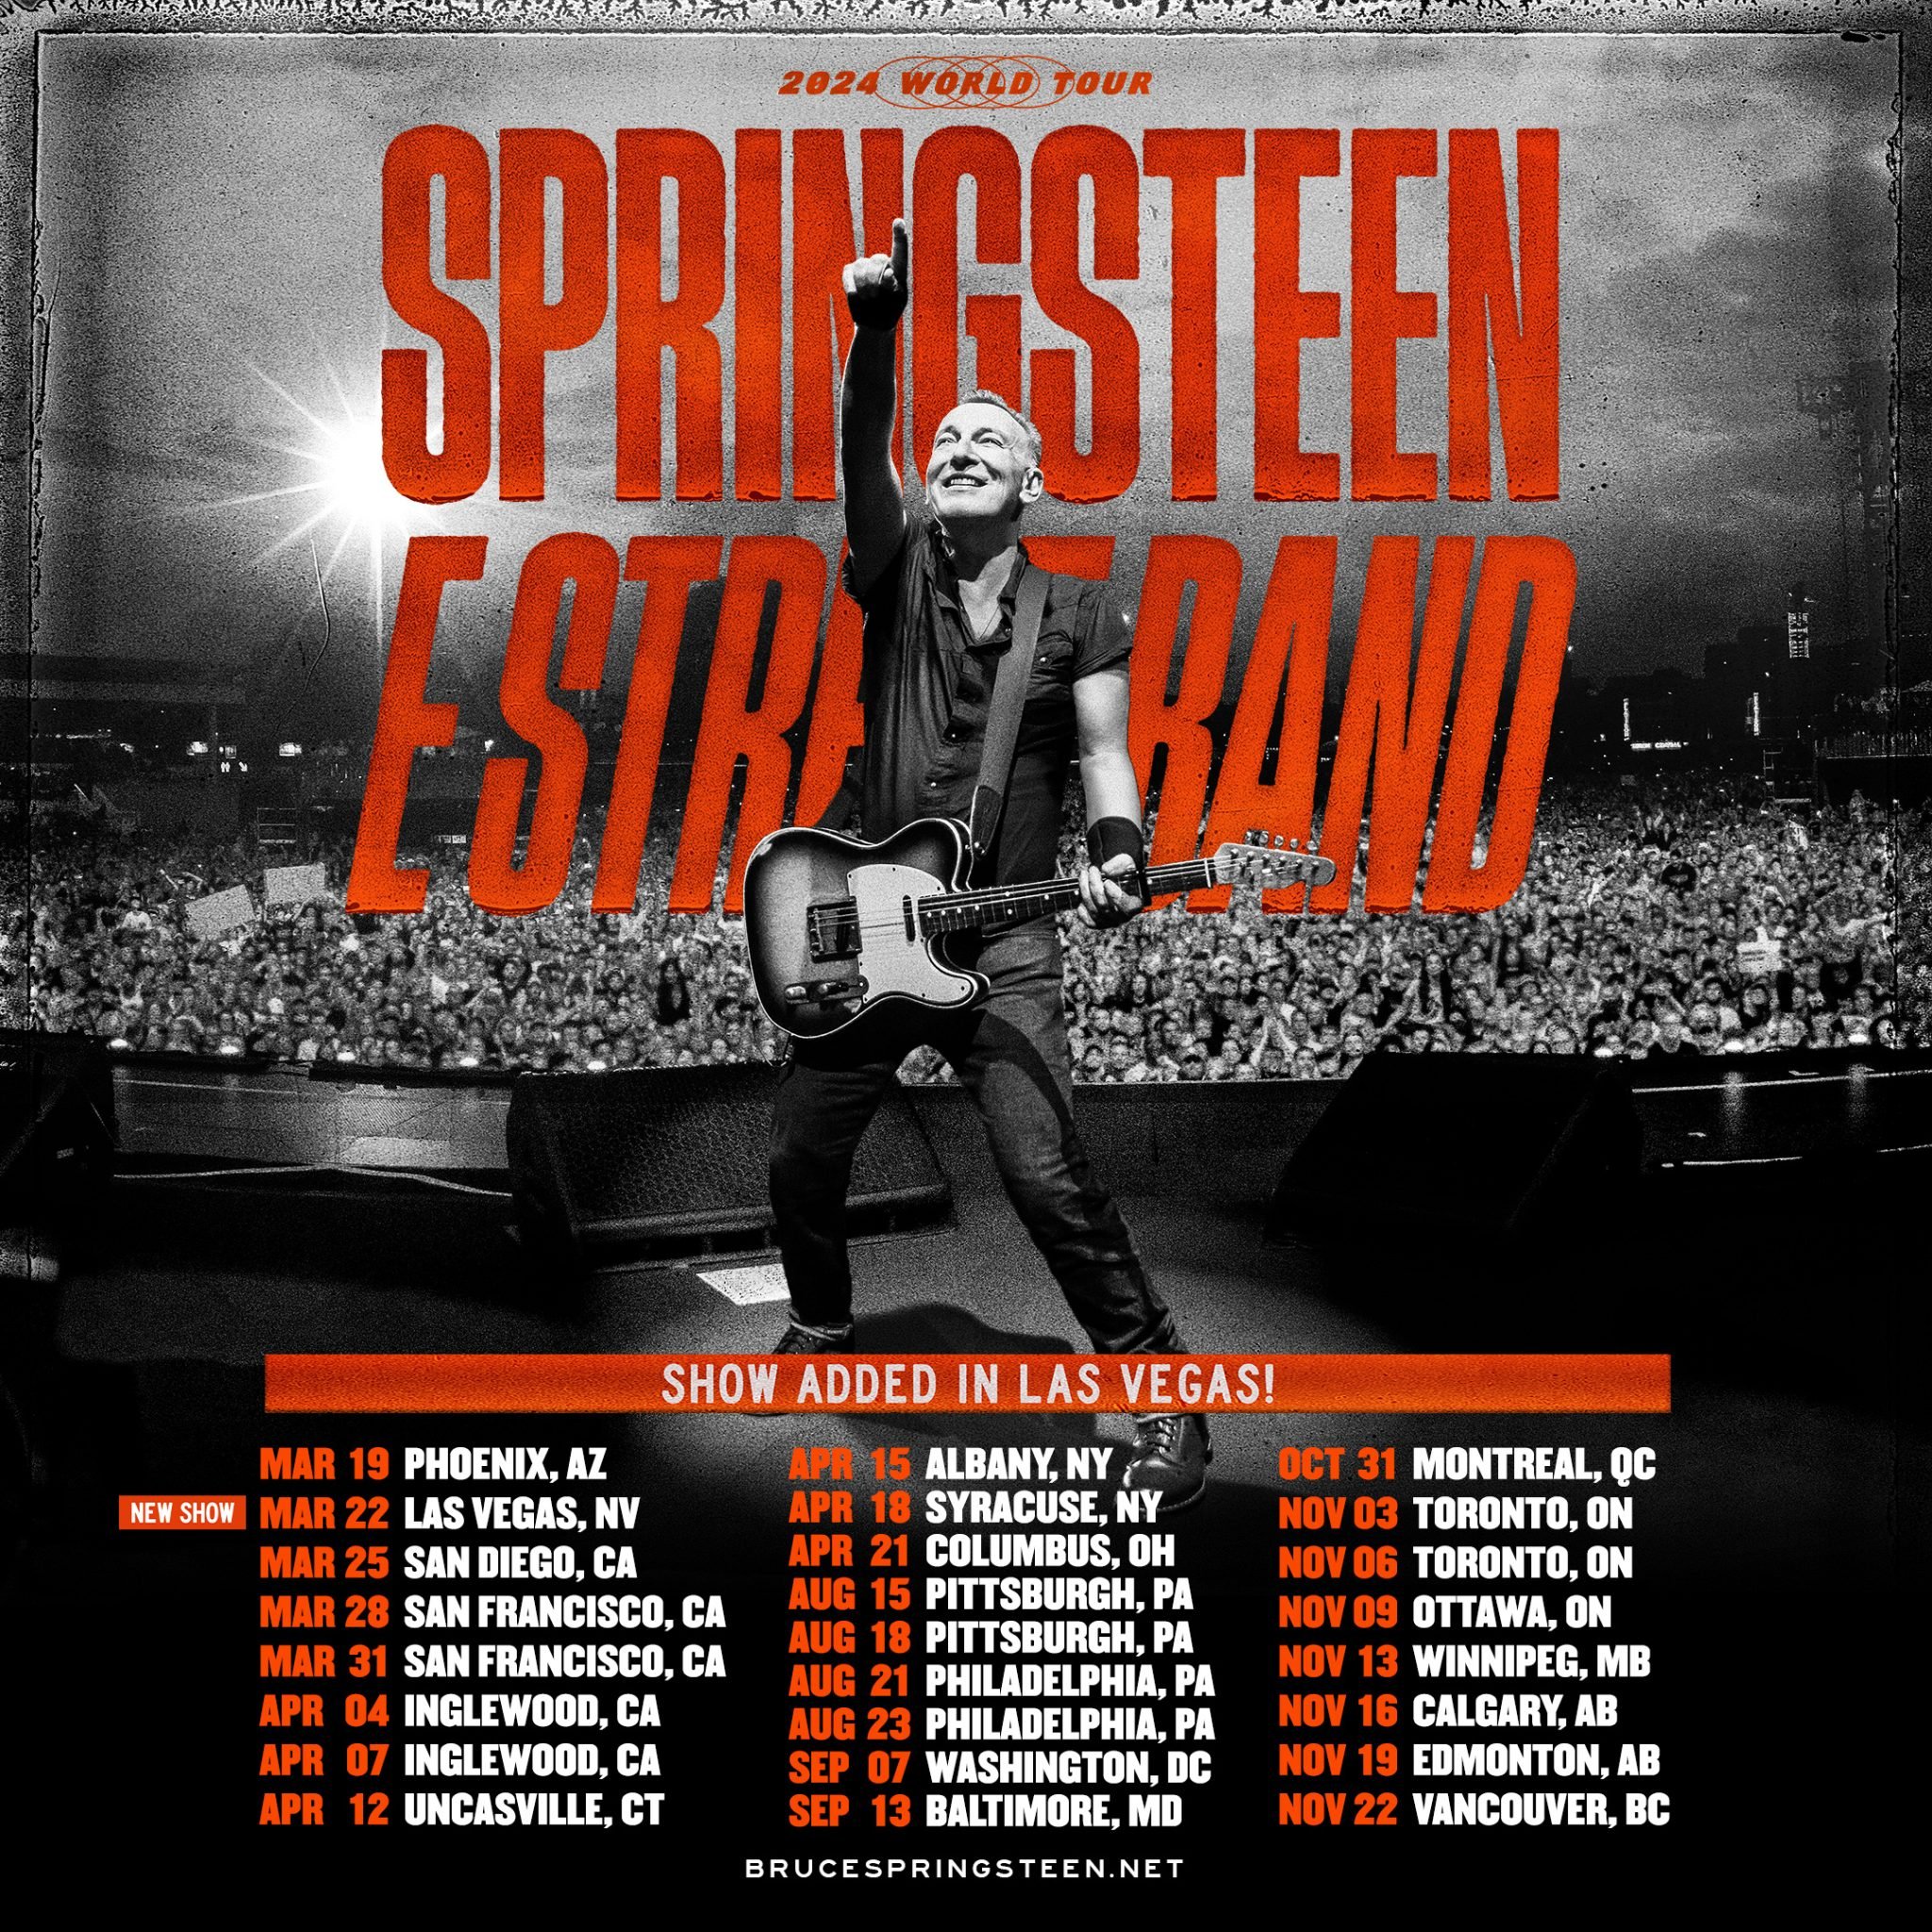 Bruce Springsteen Tickets Toronto- New Dates for Canadian Leg of World Tour